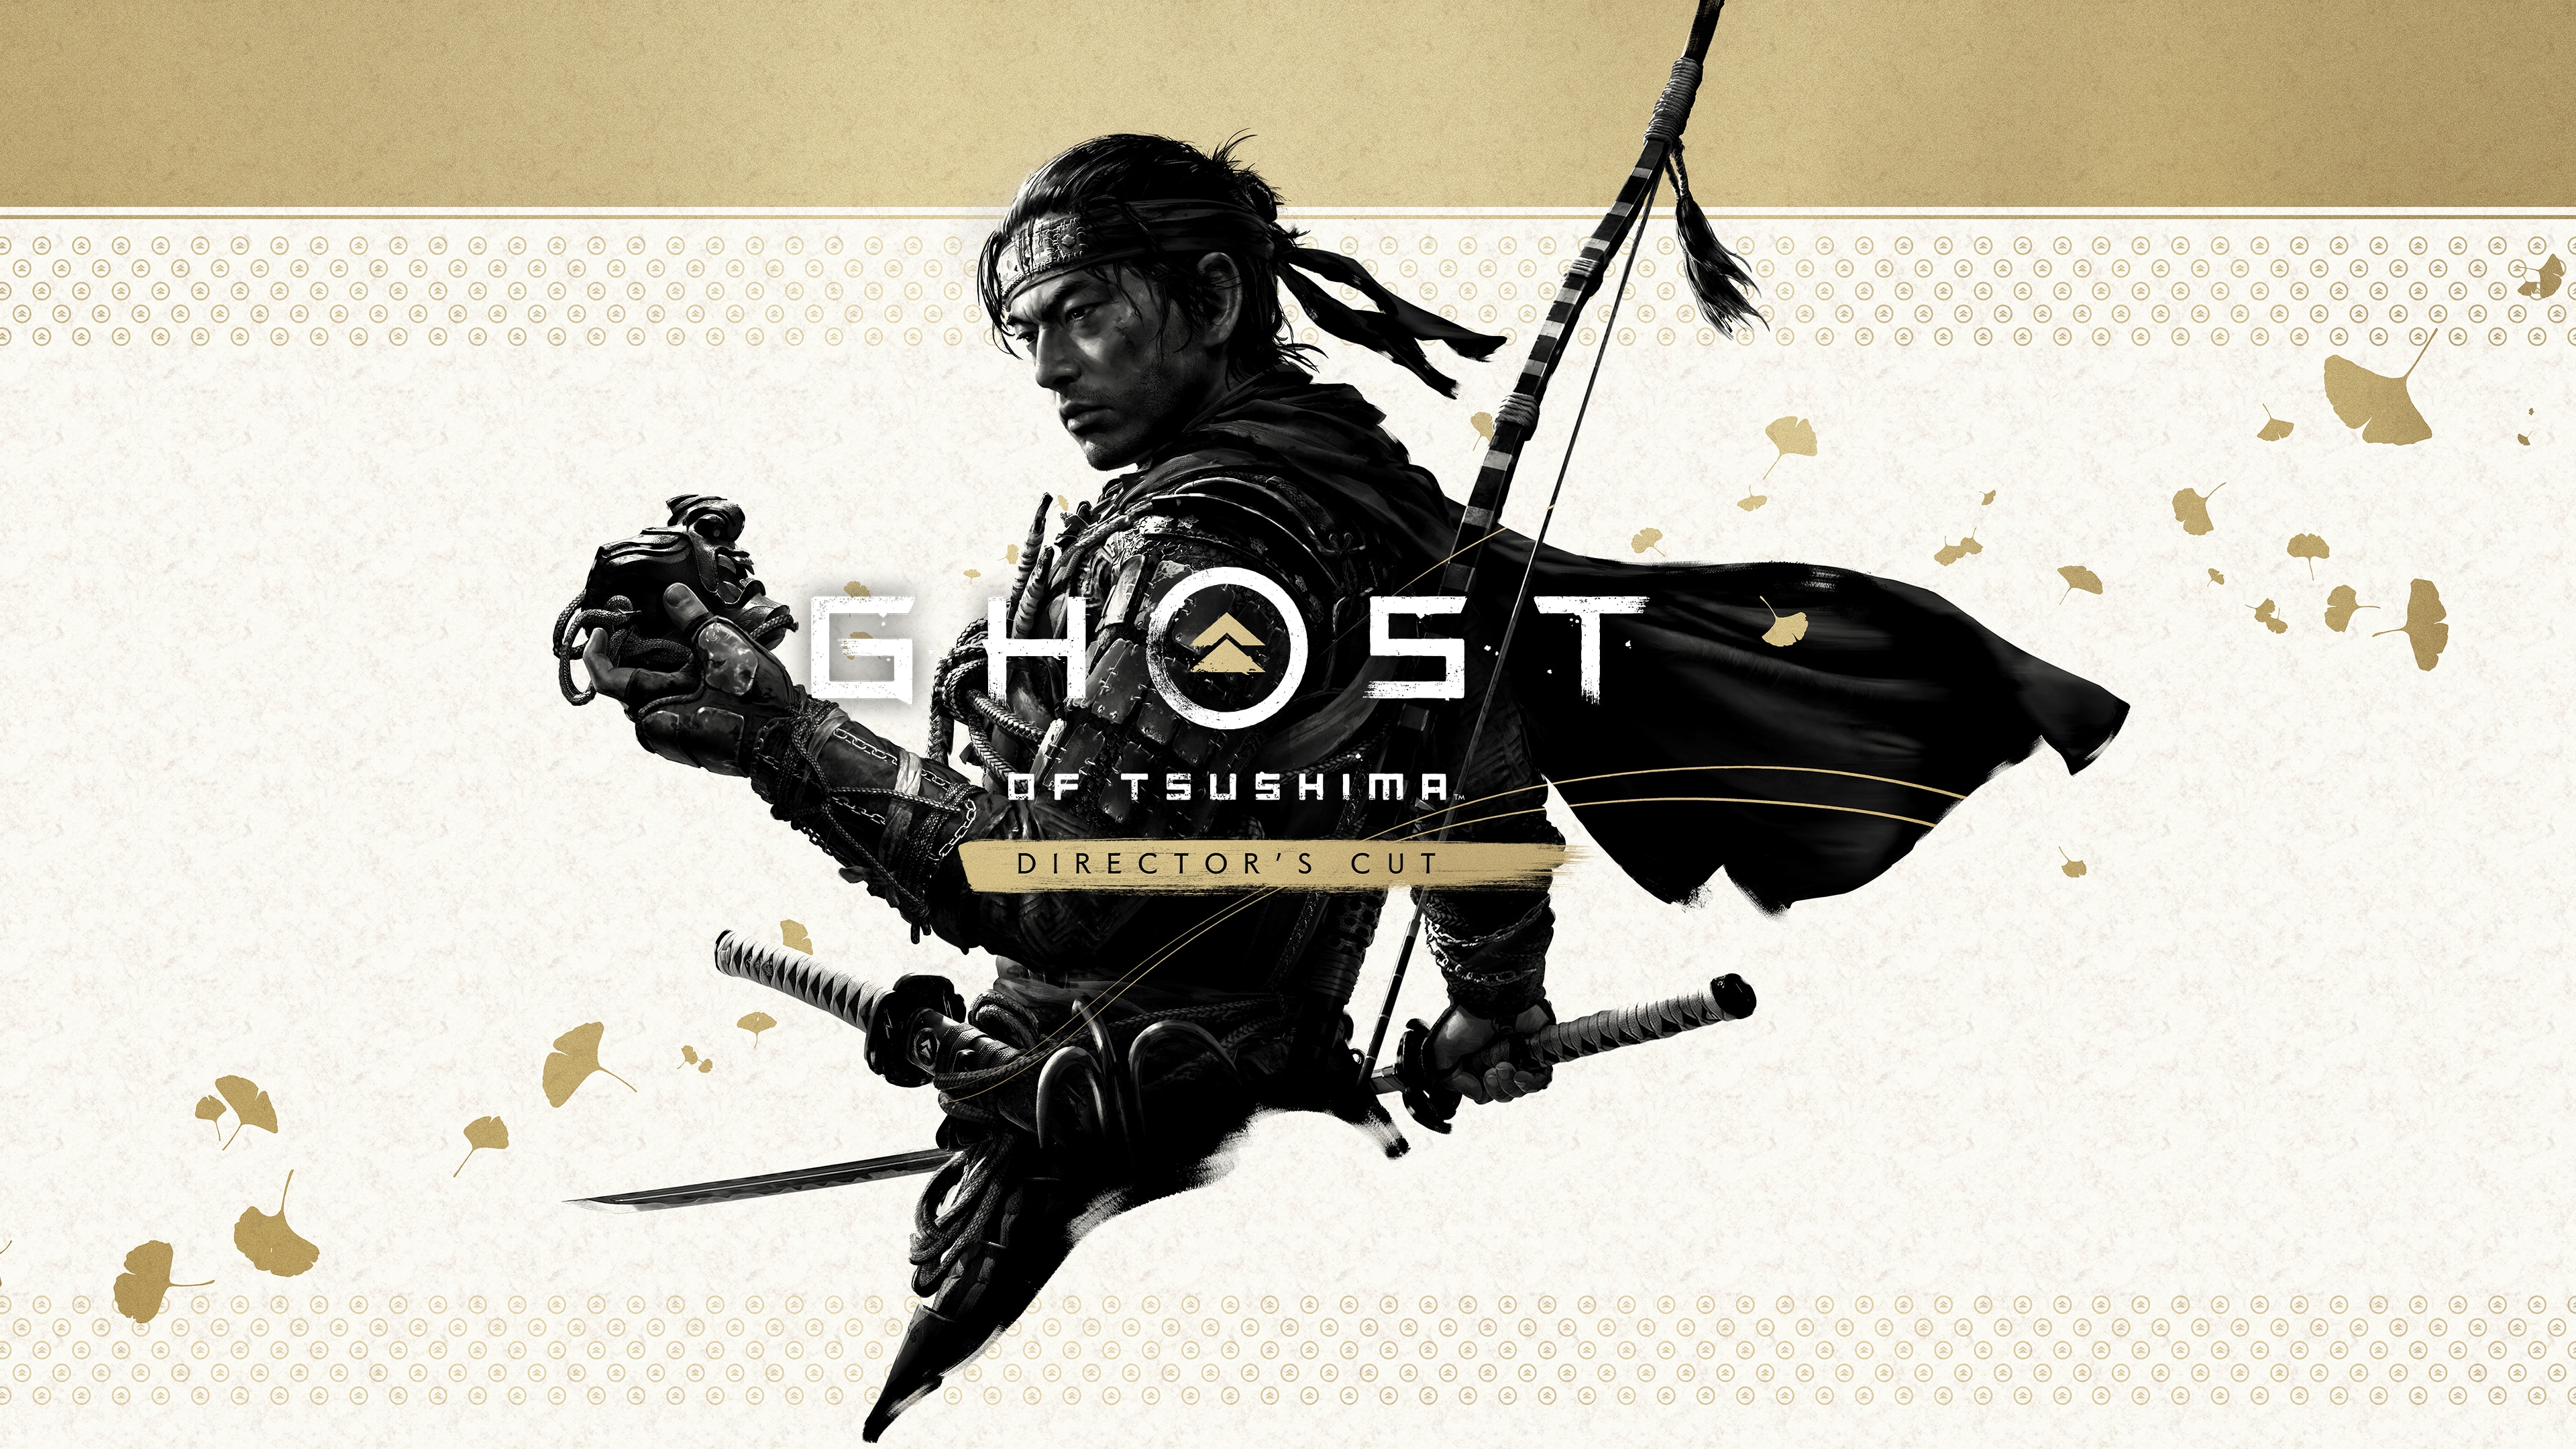 Poster of Ghost Of Tsushima: Legends Wallpapers